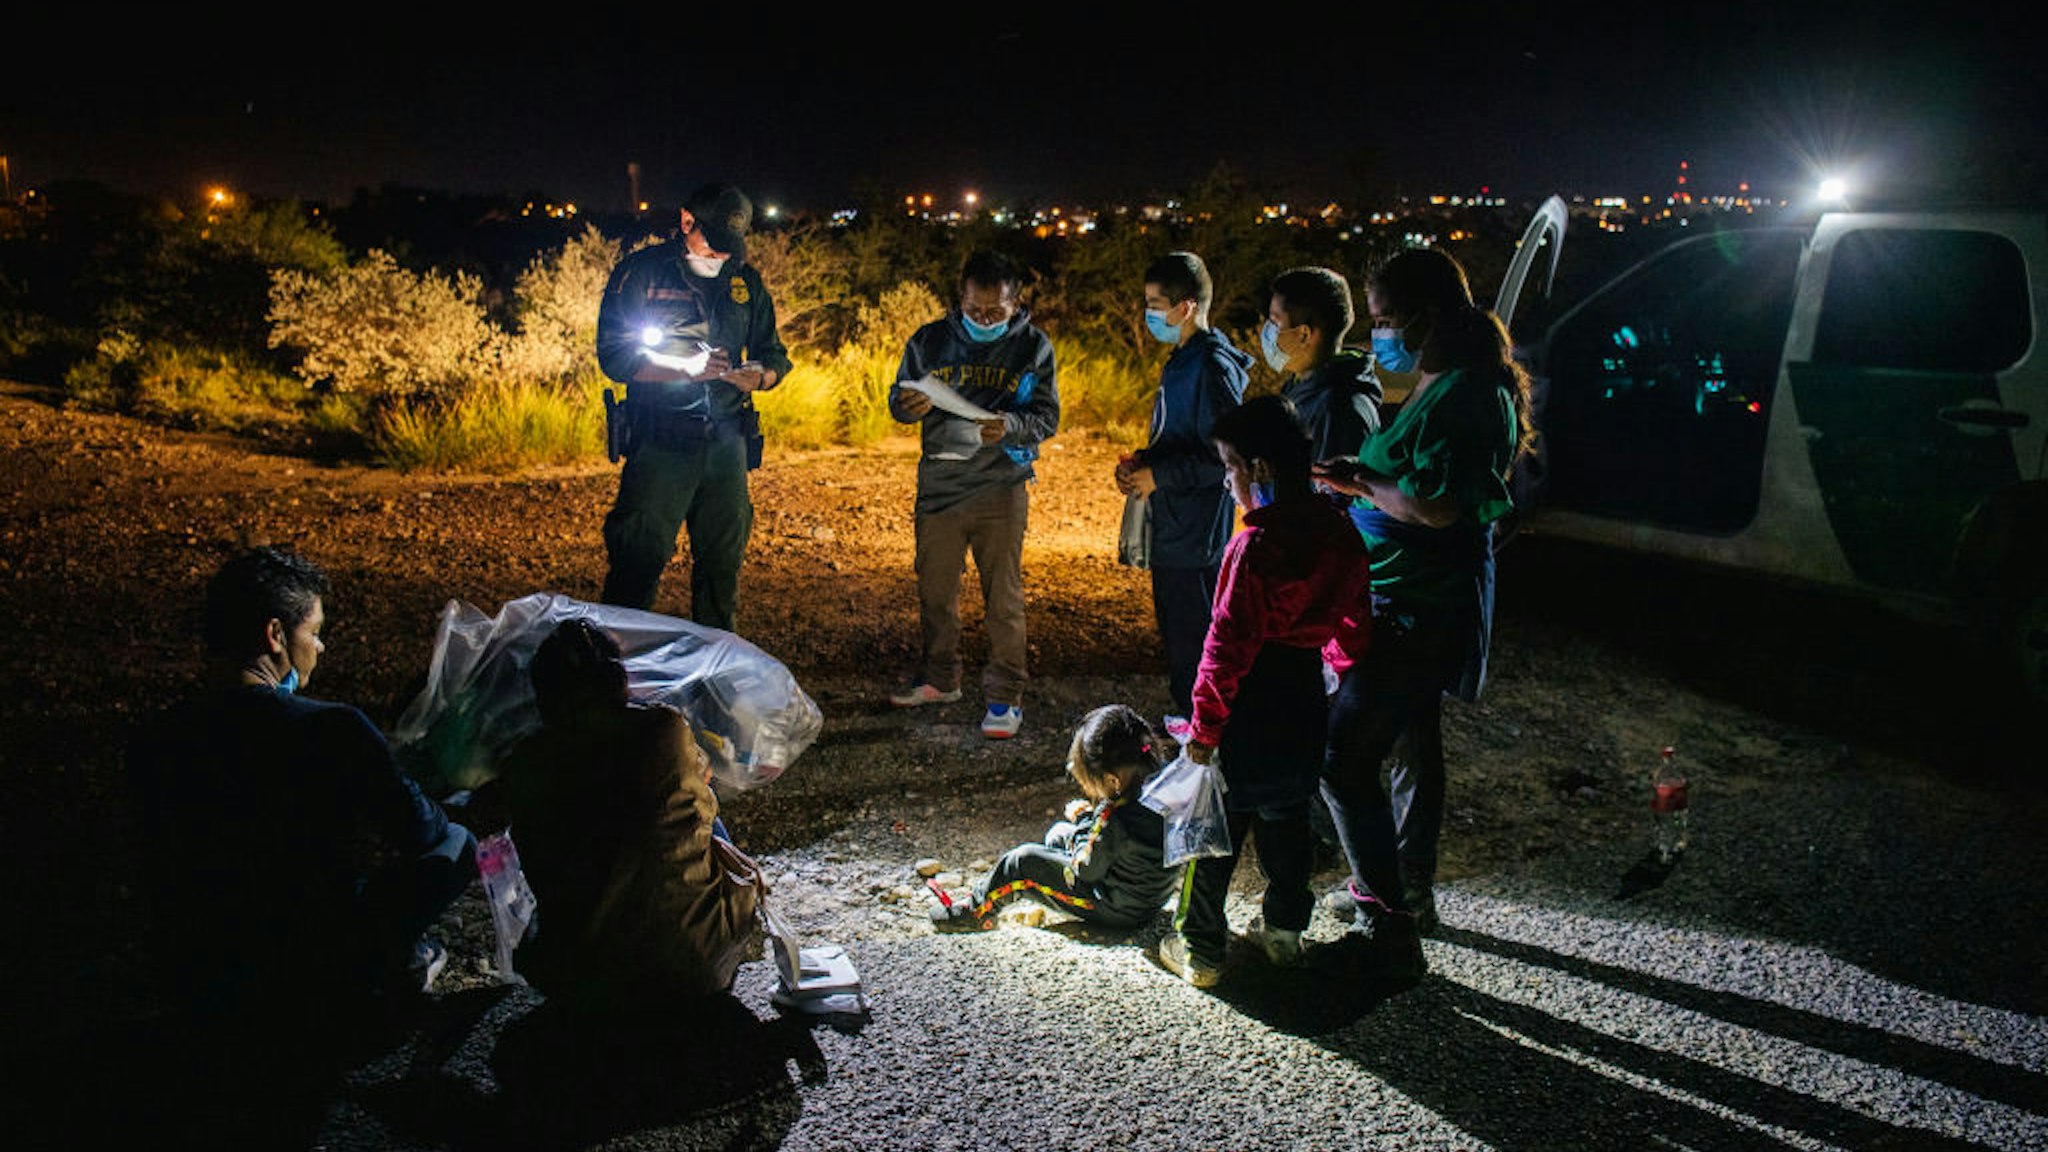 ROMA, TEXAS - JULY 01: Migrants are accounted for and processed by border patrol after crossing the Rio Grande into the United States on July 01, 2021 in Roma, Texas. Recently, Texas Gov. Greg Abbott has pledged to build a state-funded border wall as a surge of mostly Central American immigrants crossing into the United States continues to challenge U.S. immigration agencies. So far in 2021, the border patrol has apprehended more than 900,000 immigrants crossing into the U.S. from Mexico.